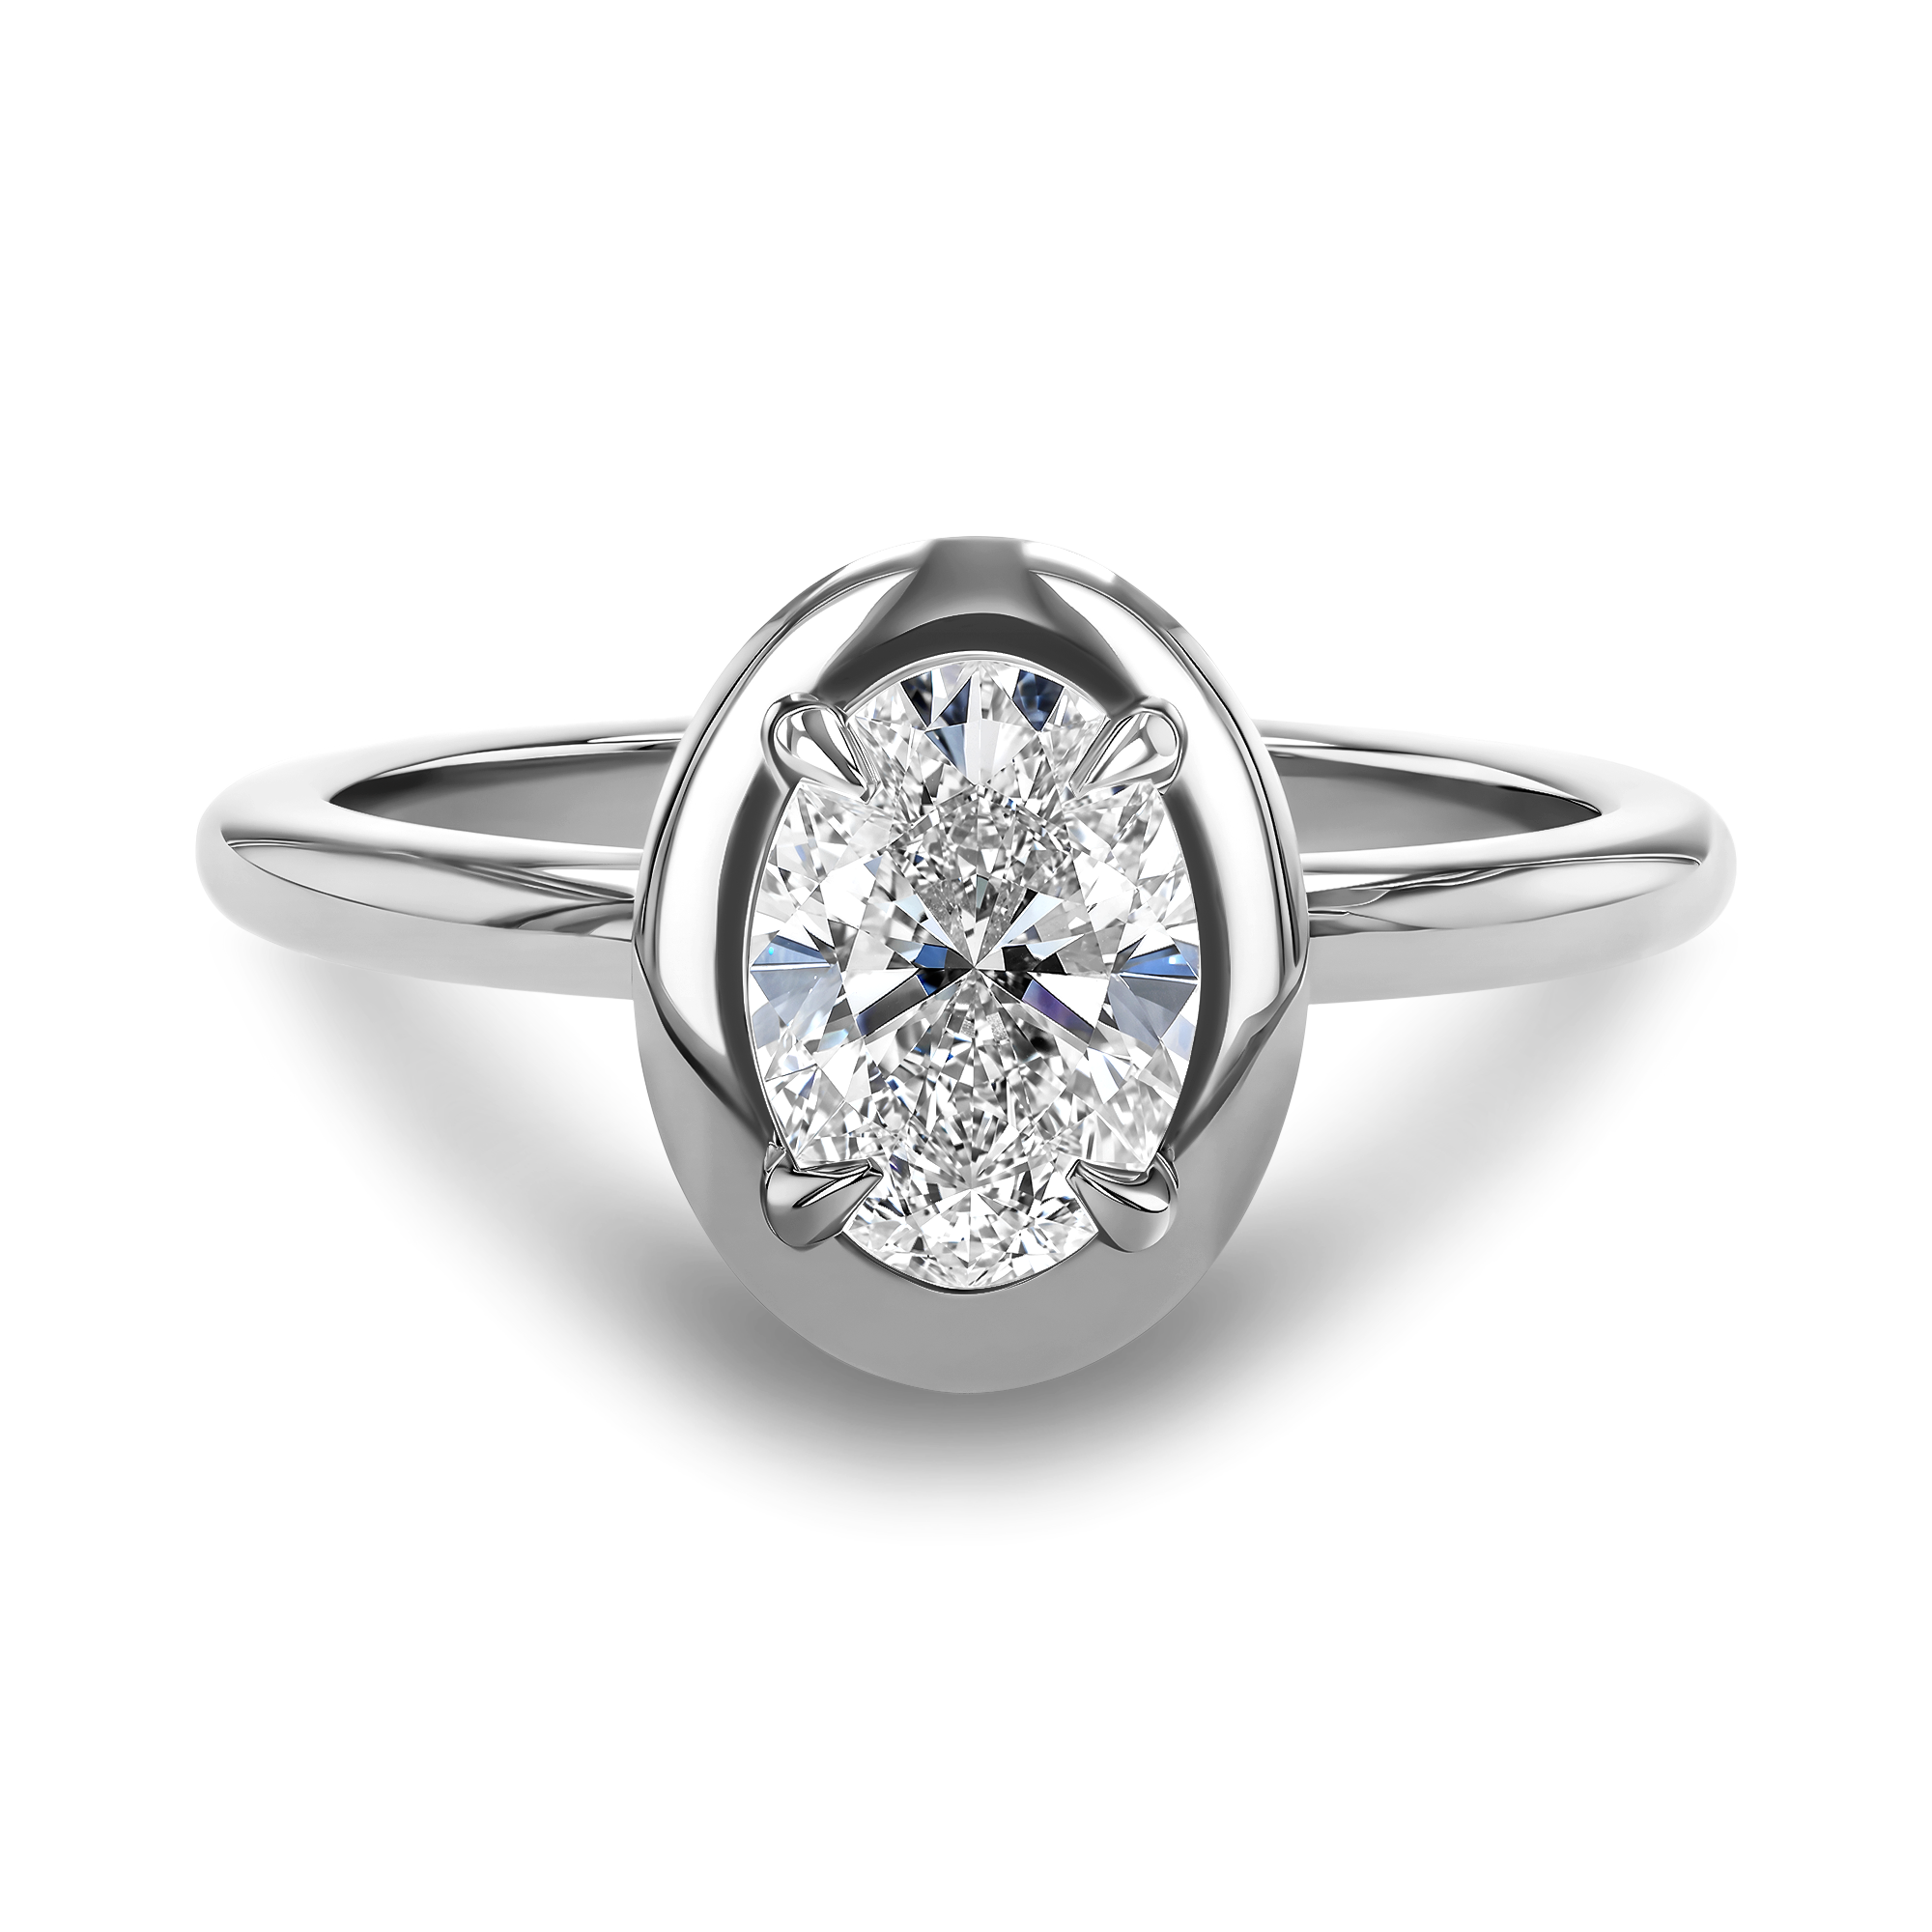 Skimming Stone 0.90ct Oval Diamond Solitaire Ring Oval Cut, Claw Set_2